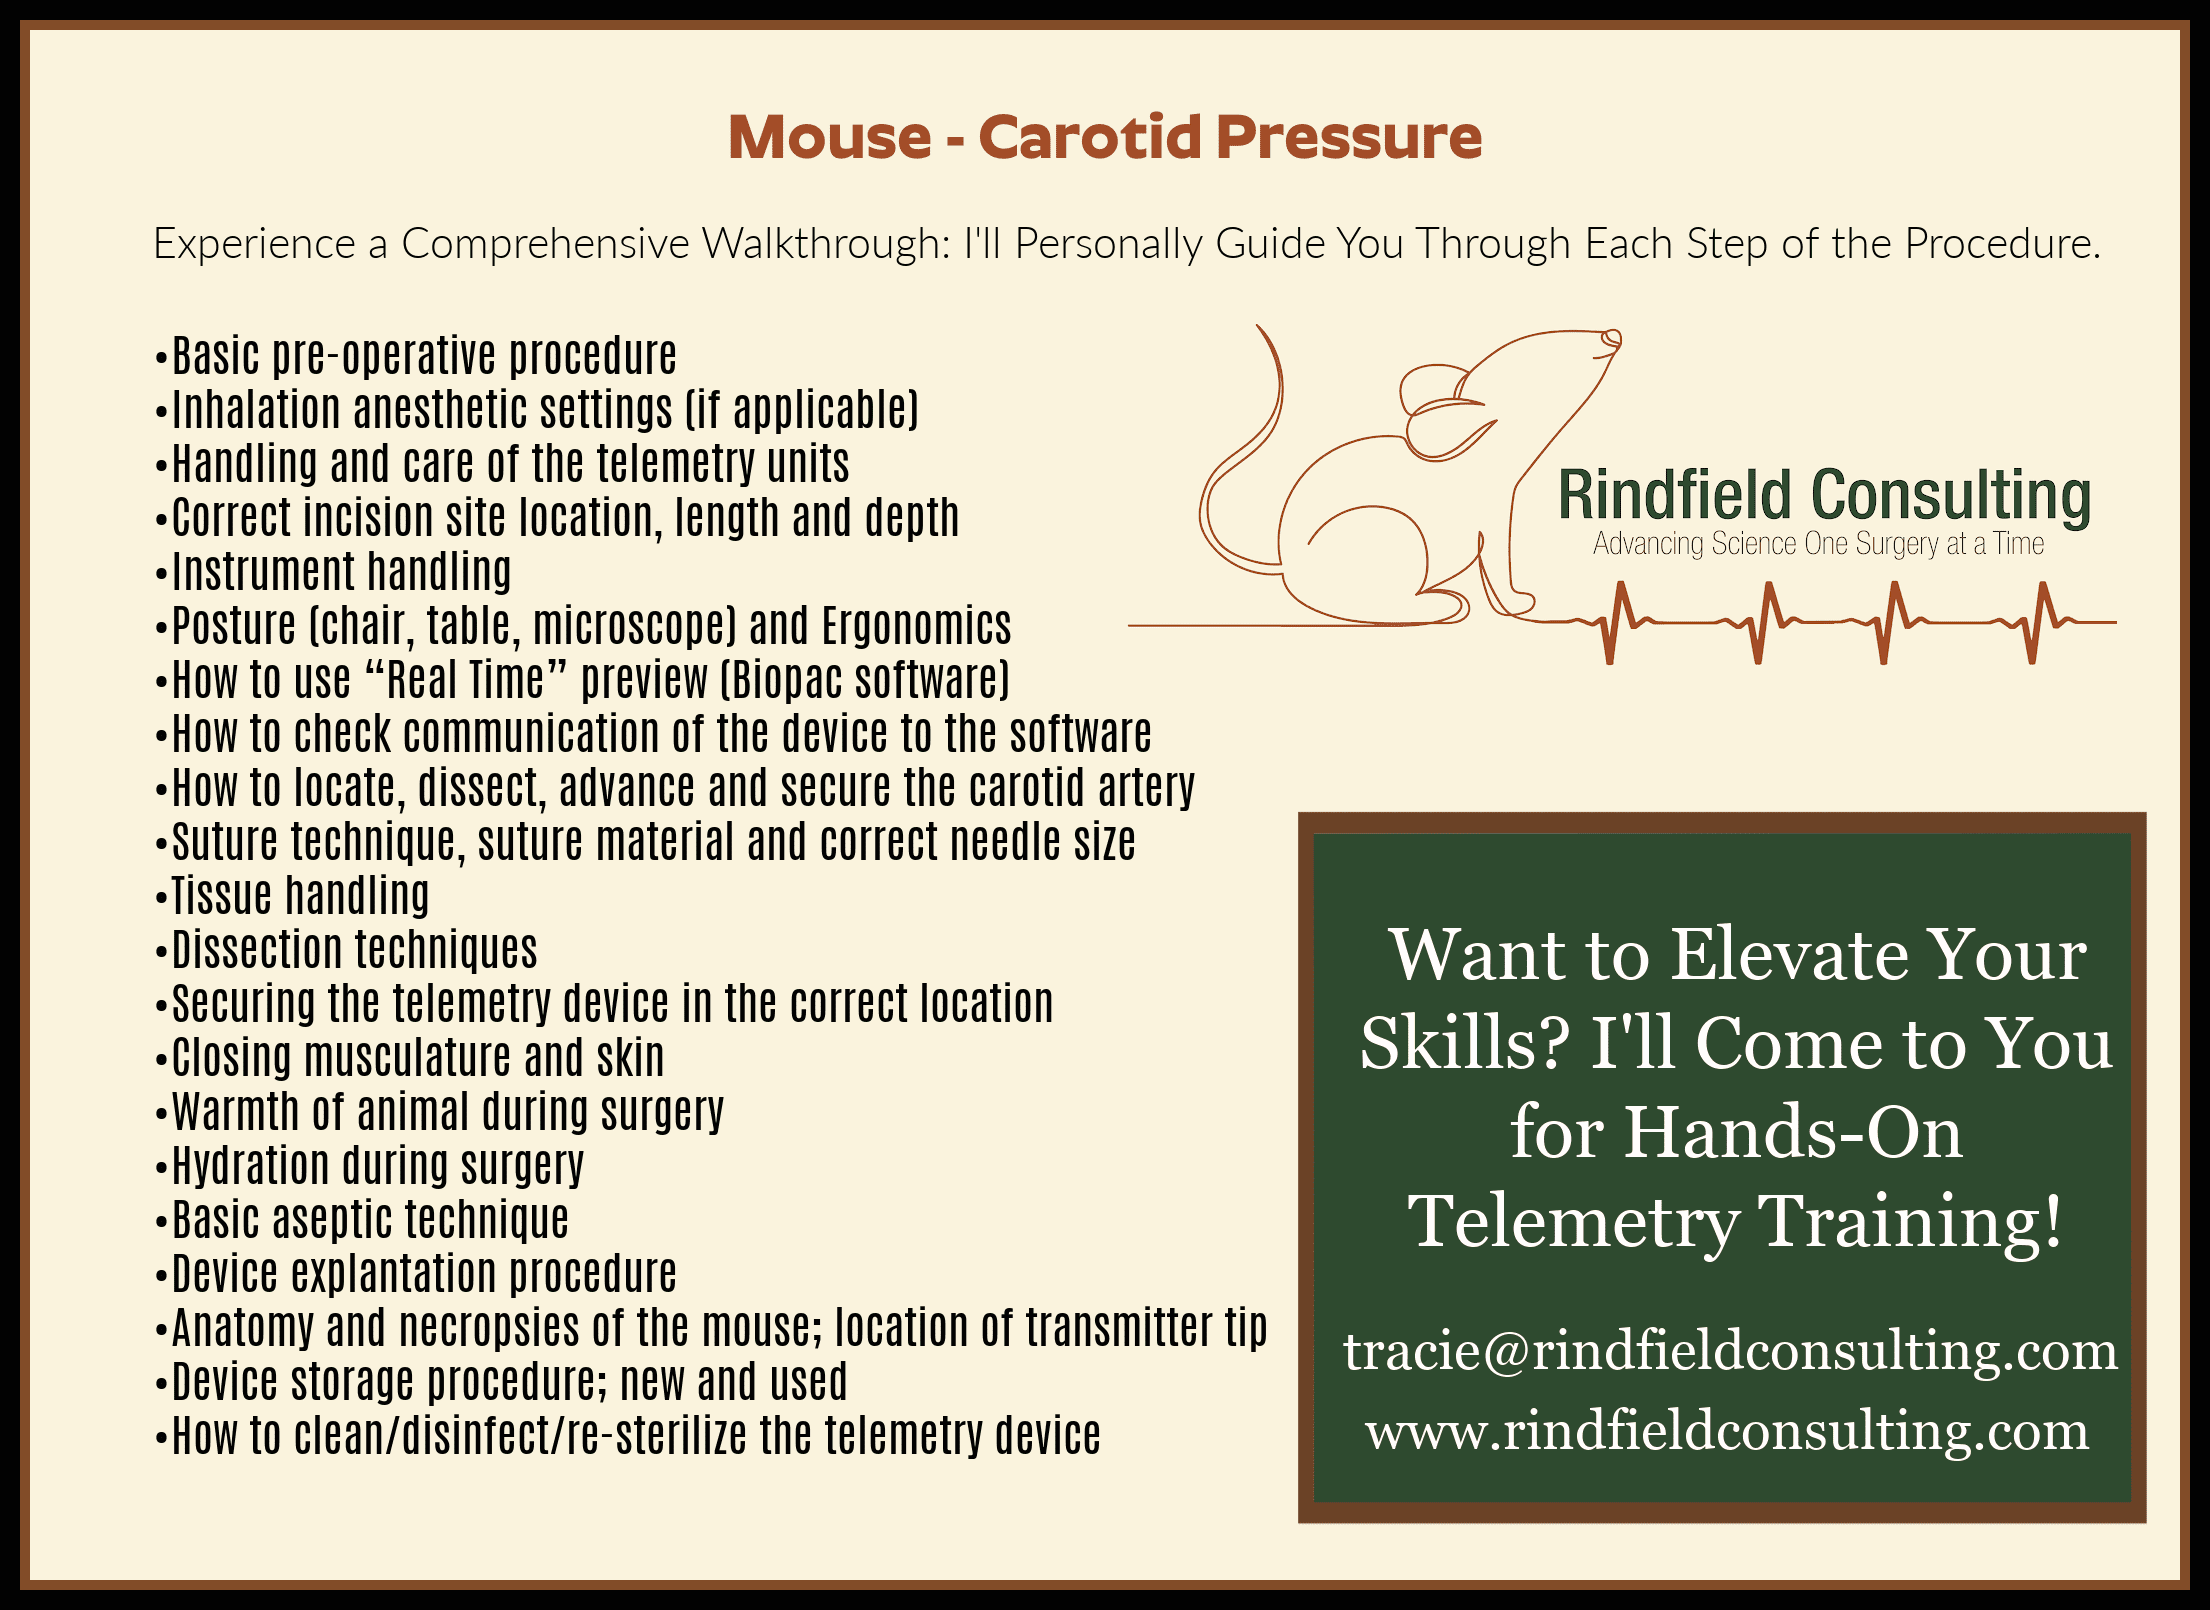 A card with information about the mouse and its pressure.